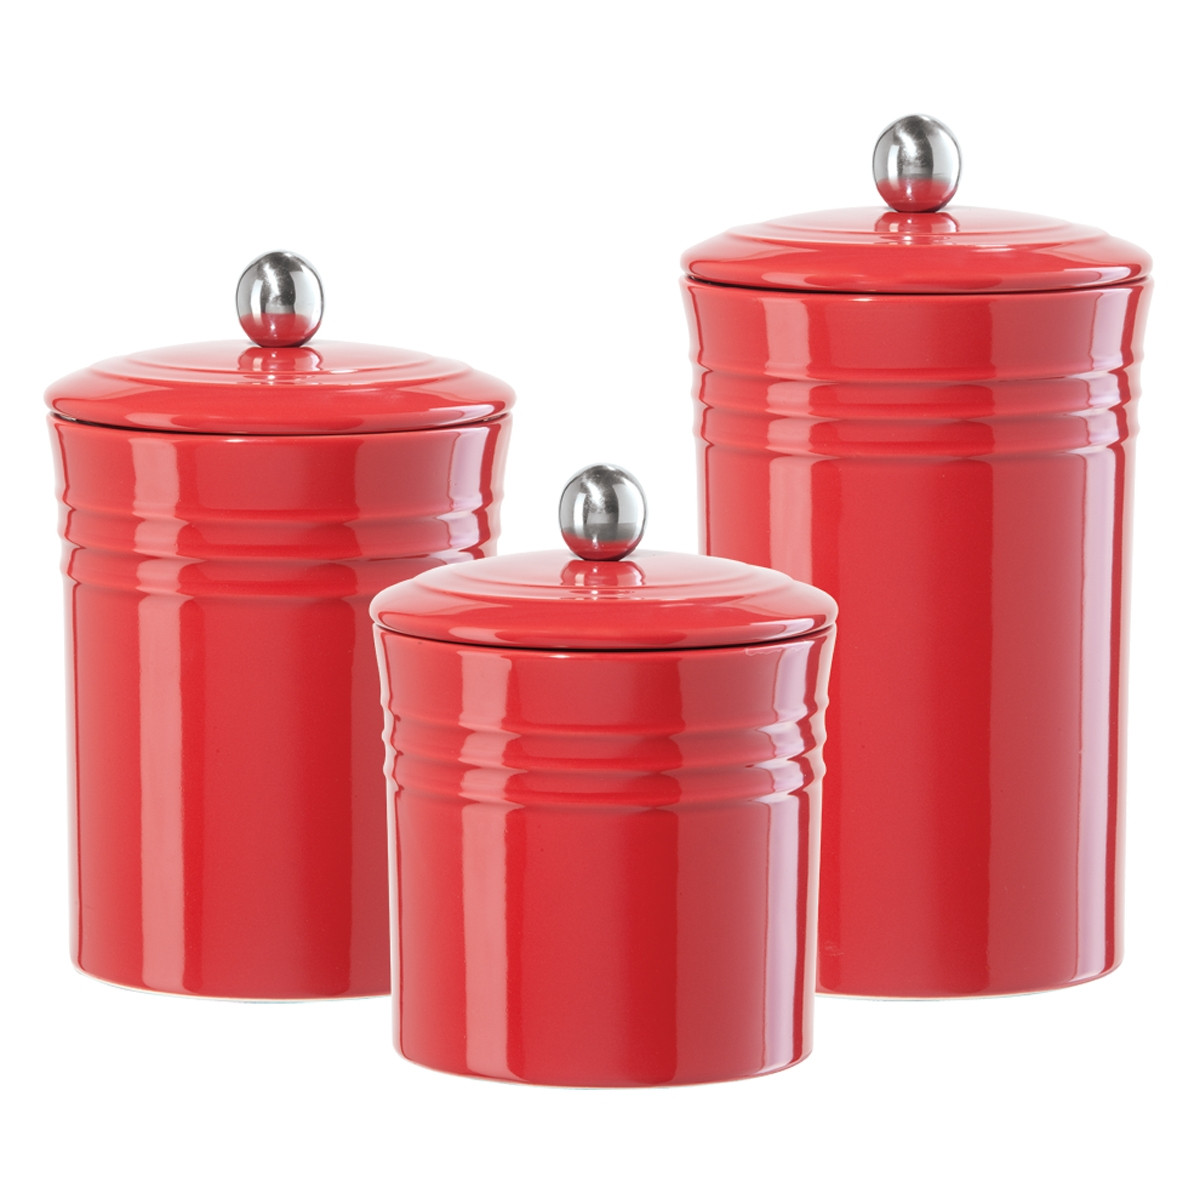 Kitchen Storage Canisters
 Gift & Home Today Storage canisters for the kitchen